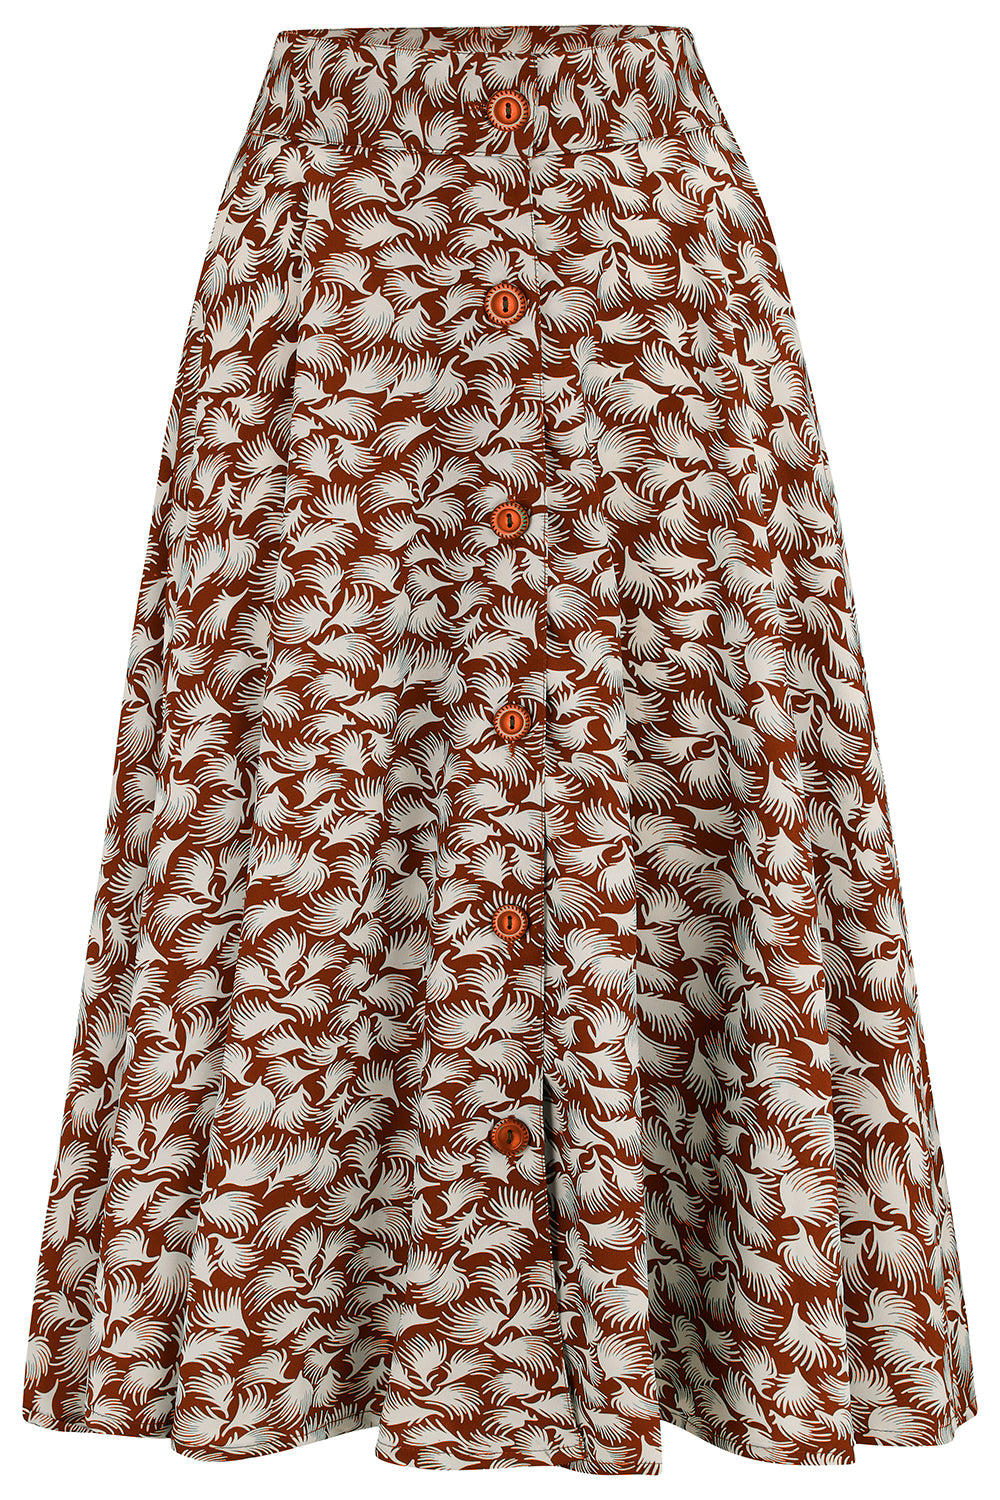 The "Beverly" Button Front Full Circle Skirt with Pockets in Cinnamon Whisp Print, True 1950s Vintage Style - CC41, Goodwood Revival, Twinwood Festival, Viva Las Vegas Rockabilly Weekend Rock n Romance Rock n Romance